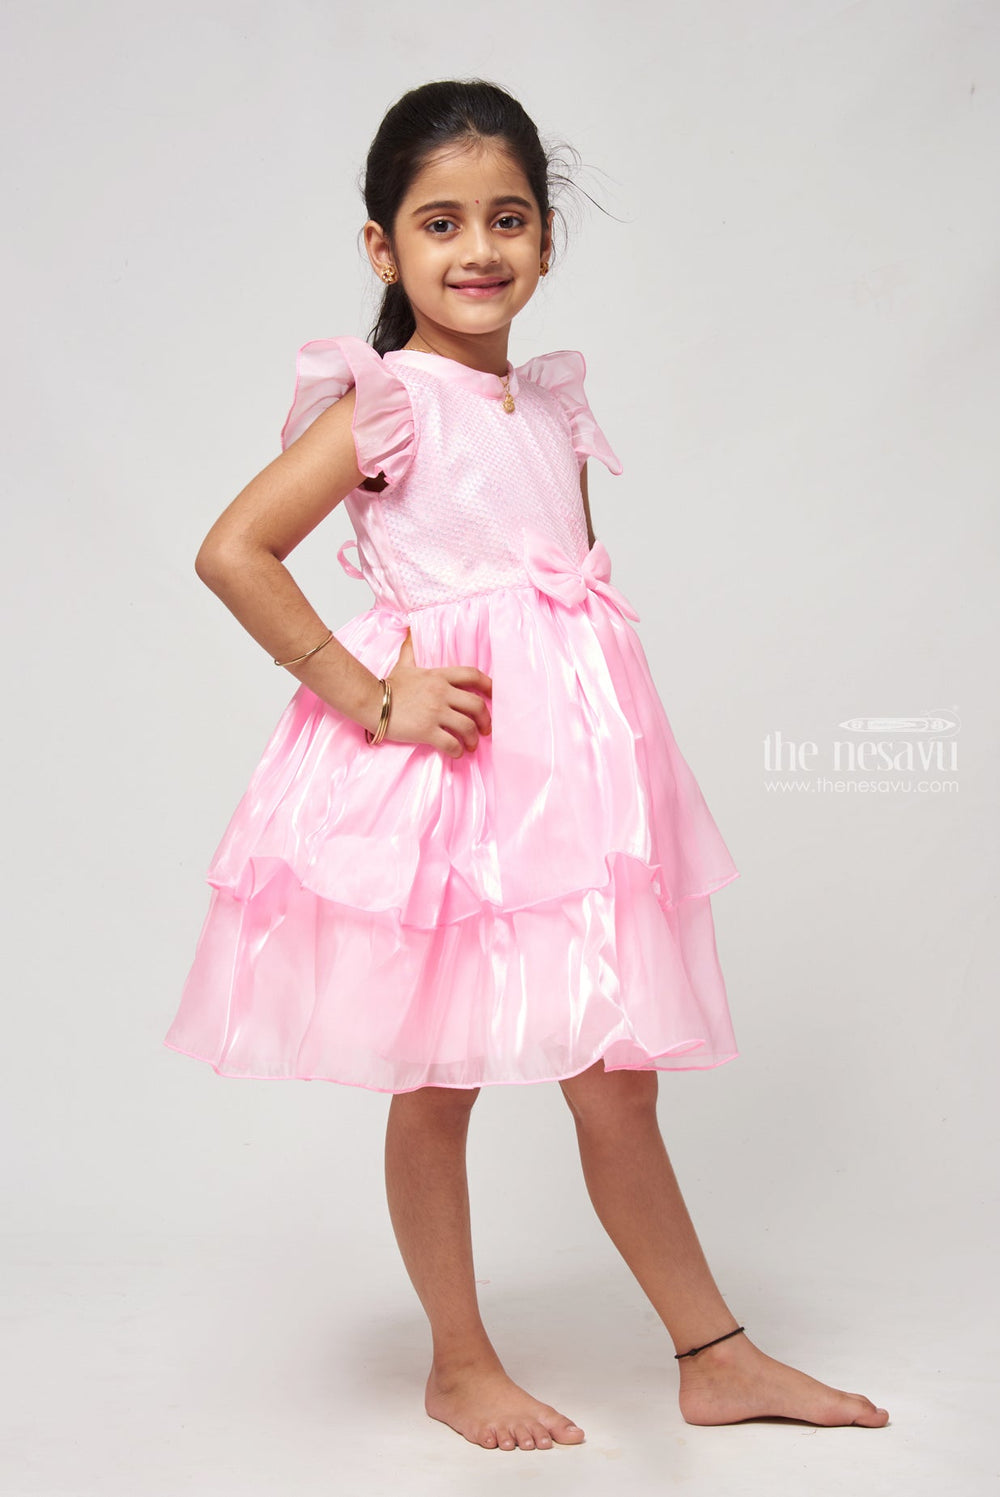 The Nesavu Girls Fancy Party Frock Baby Pink Elegance Sequin-Detailed Gown for Infants - Monotone Party Frock with Bow & Dual Layers Nesavu Newborn Birthday Outfit | Party Wear Frock For Girls | The Nesavu